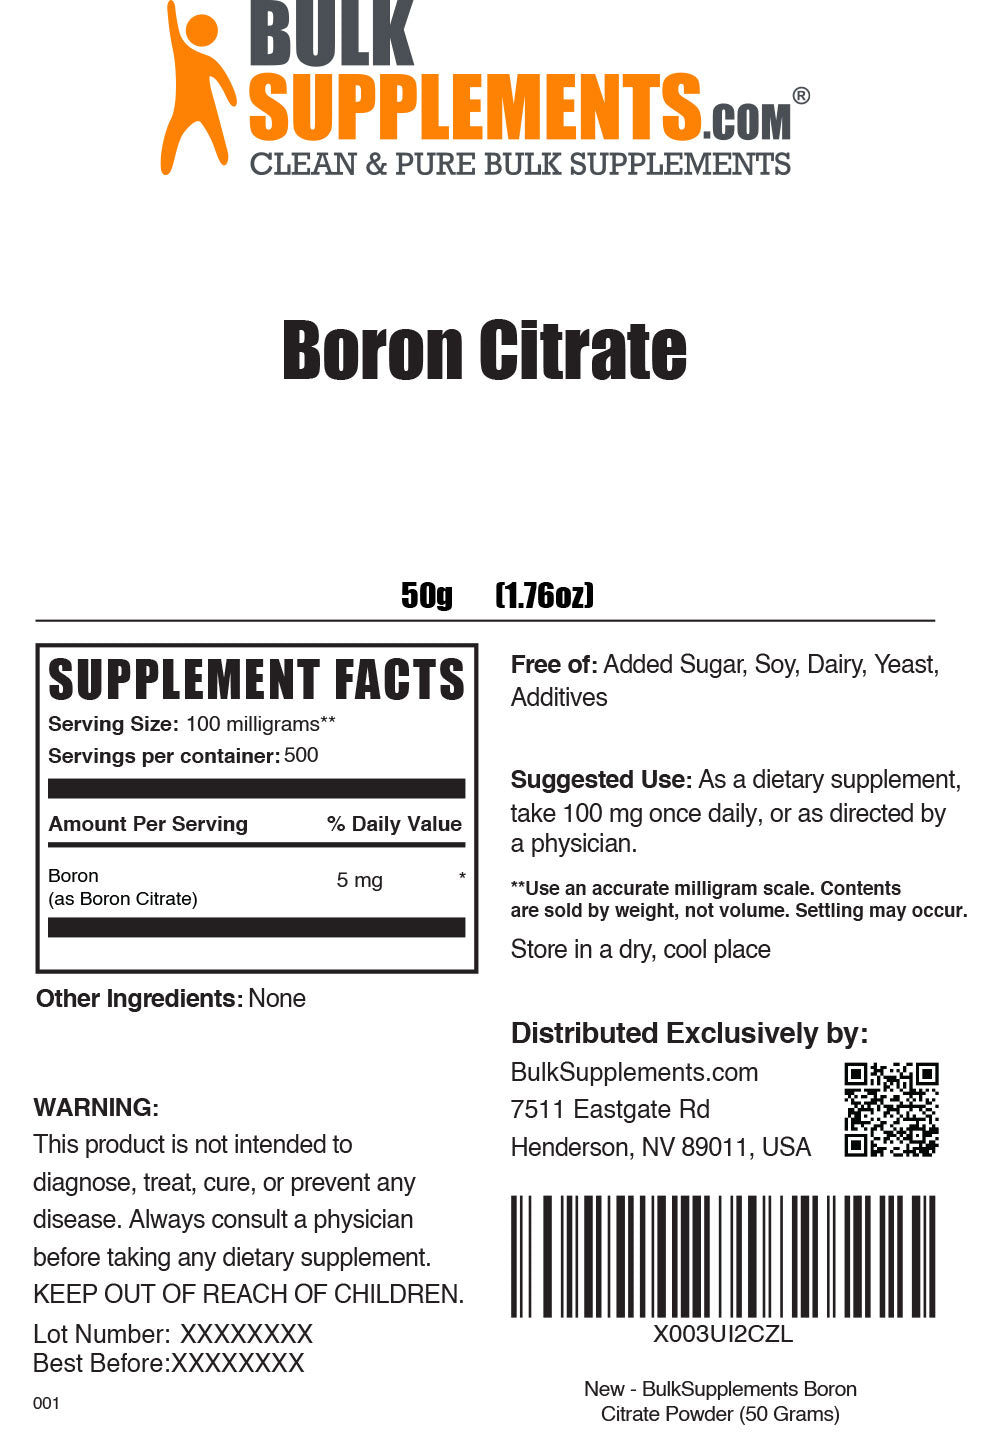 50g of Boron Citrate Supplement Facts